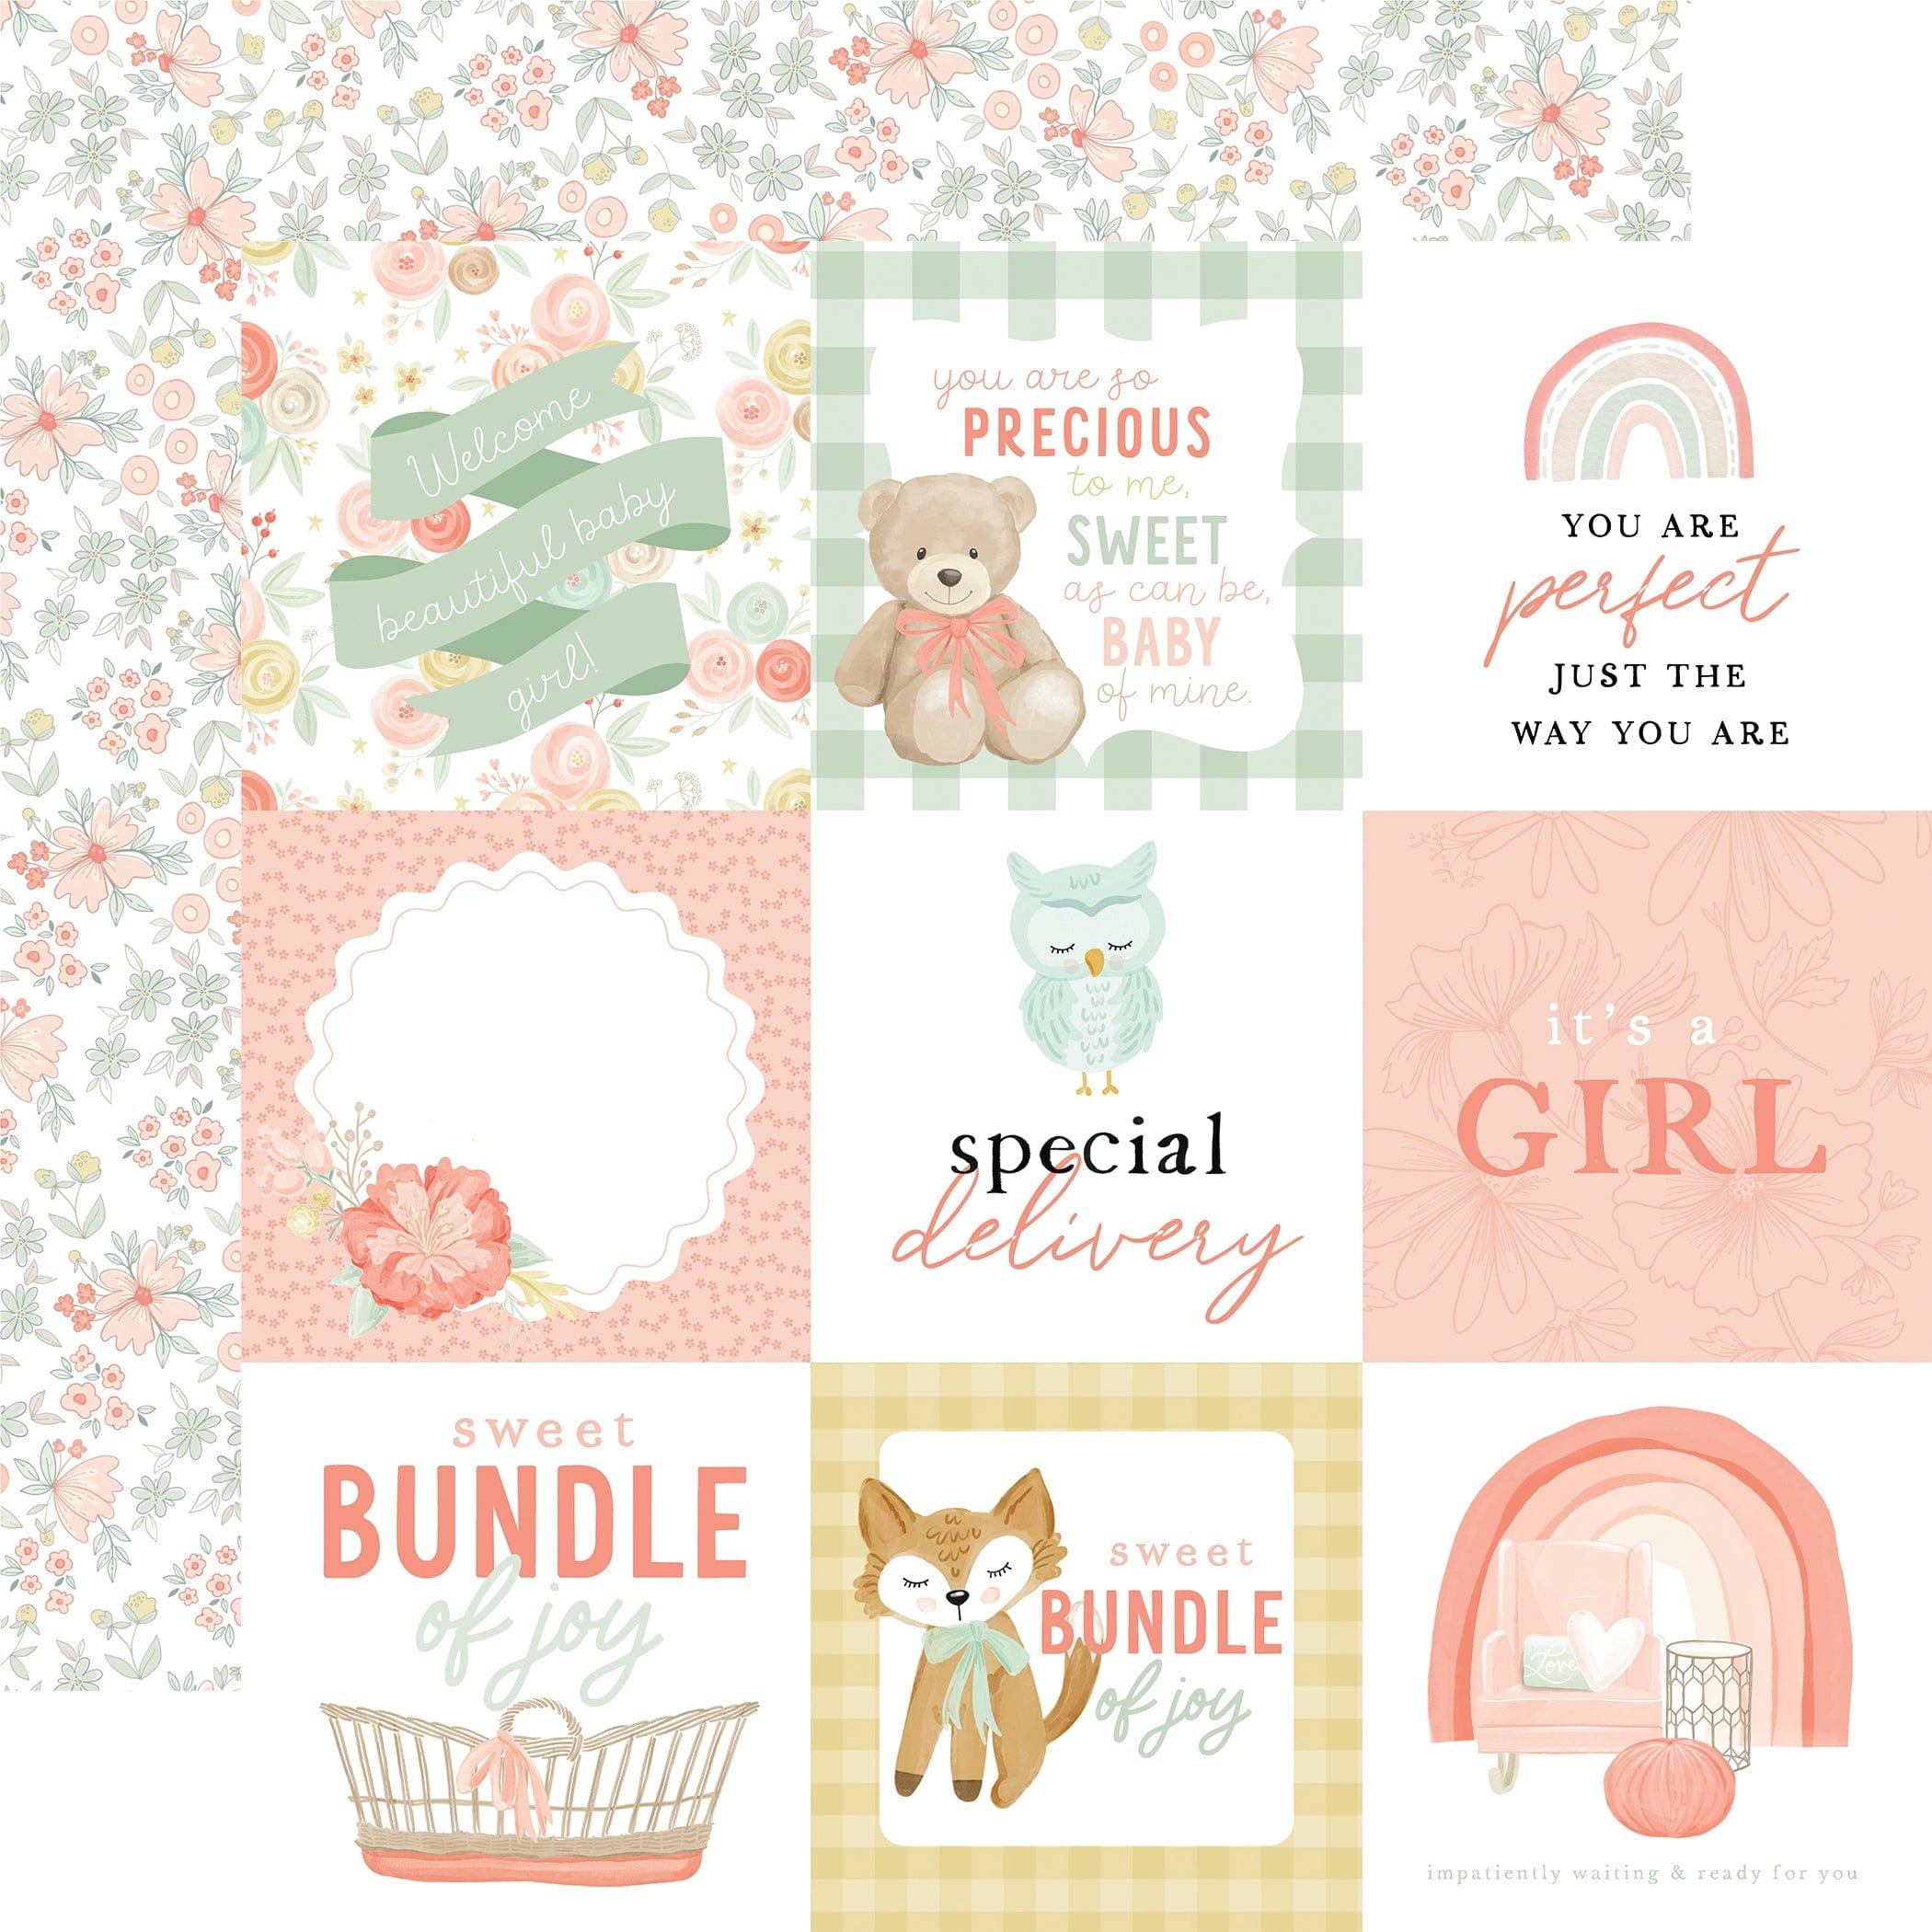 It's A Girl Collection 4 x 4 Journaling Cards 12 x 12 Double-Sided Scrapbook Paper by Echo Park Paper - Scrapbook Supply Companies